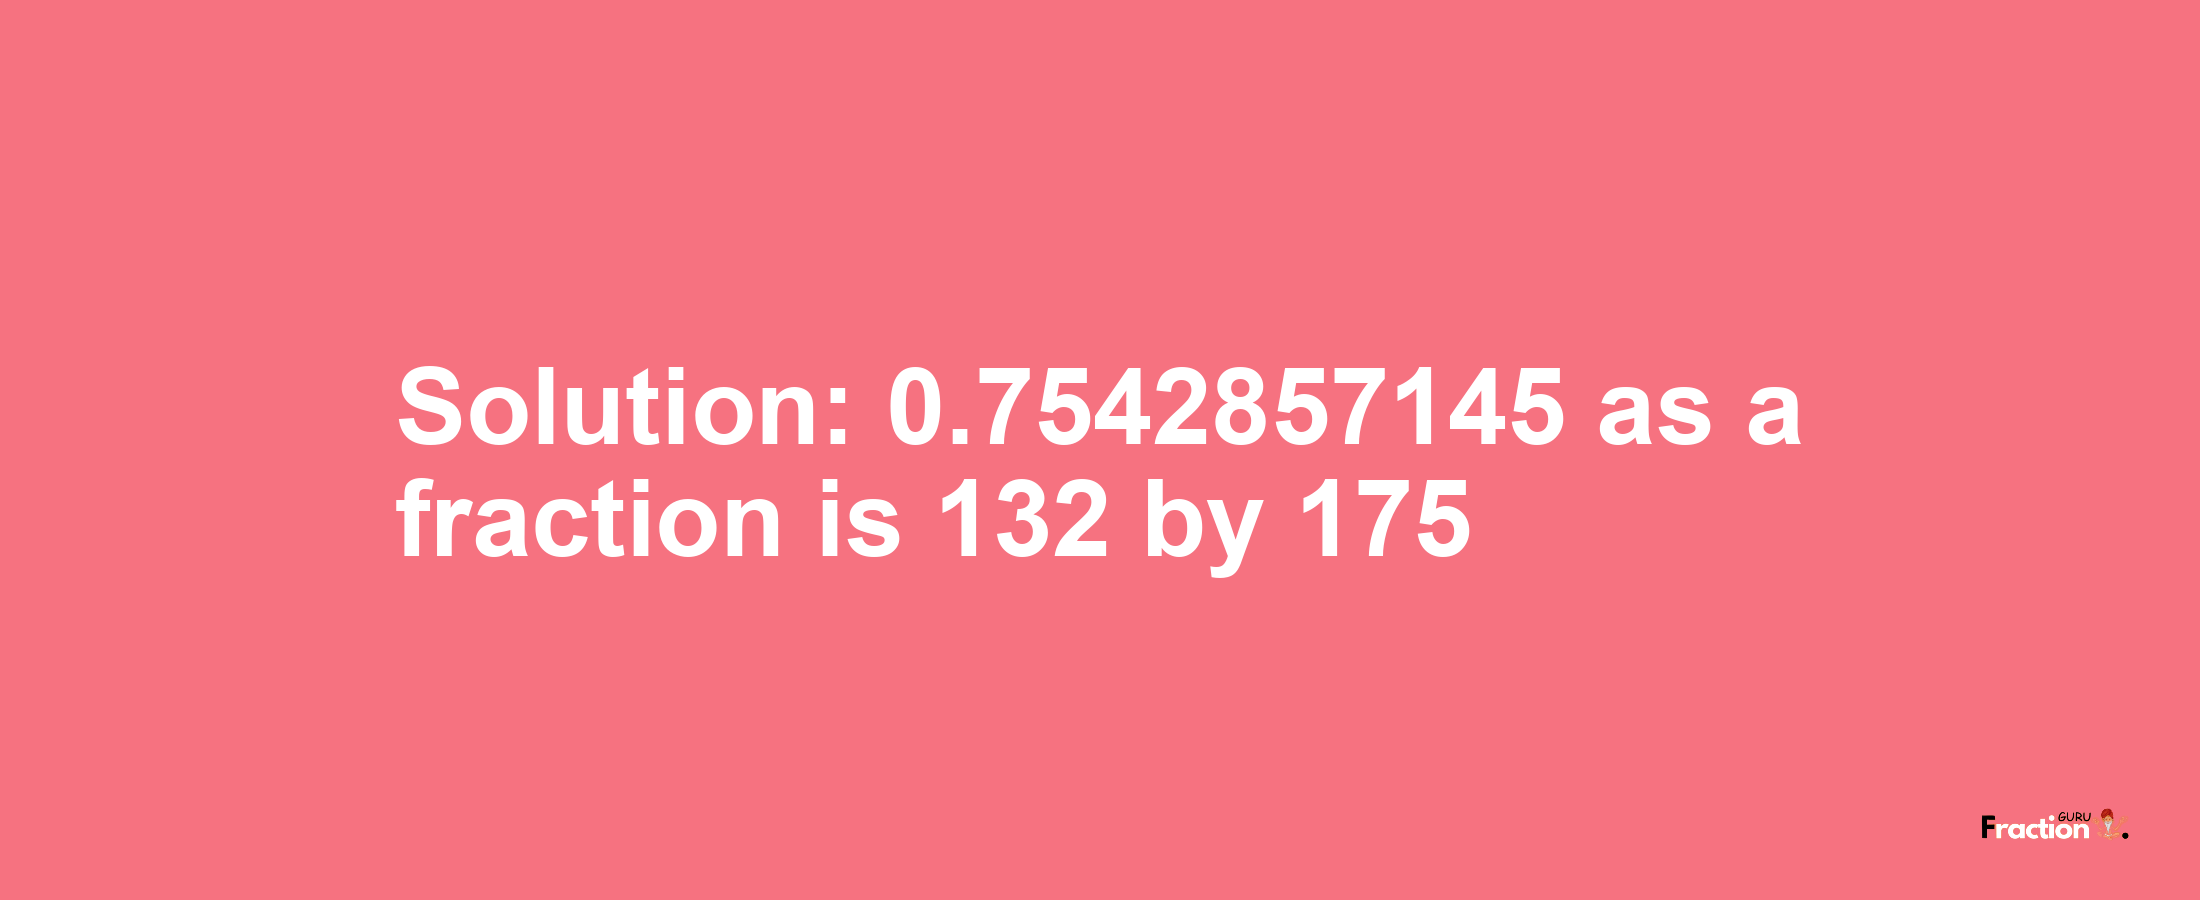 Solution:0.7542857145 as a fraction is 132/175